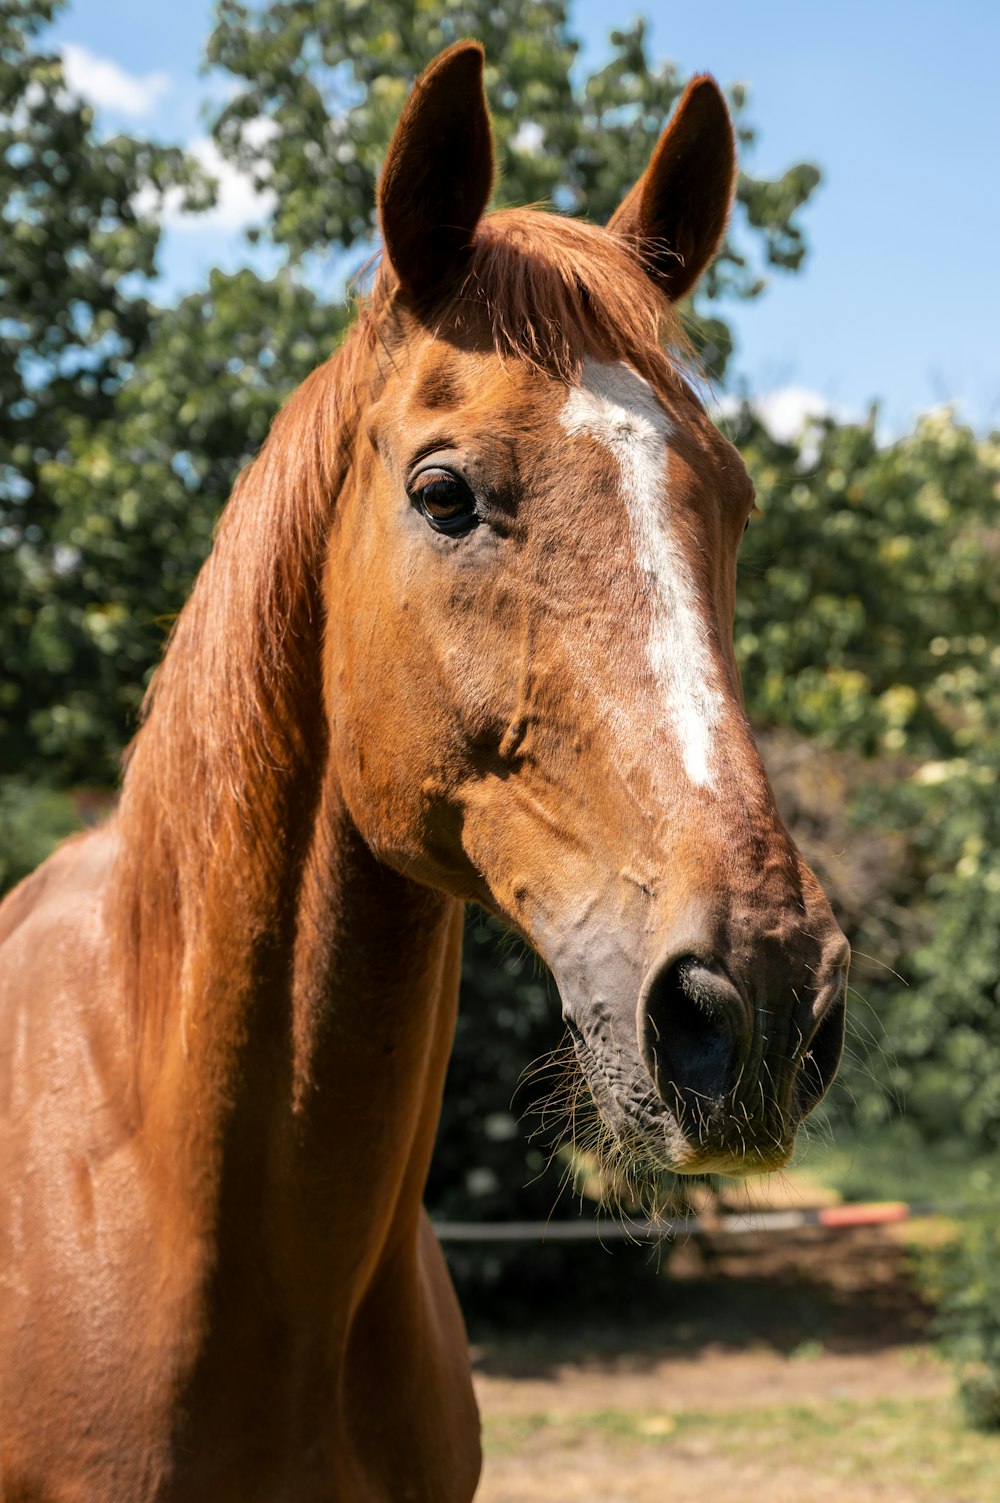 a close up of a horse with trees in the background